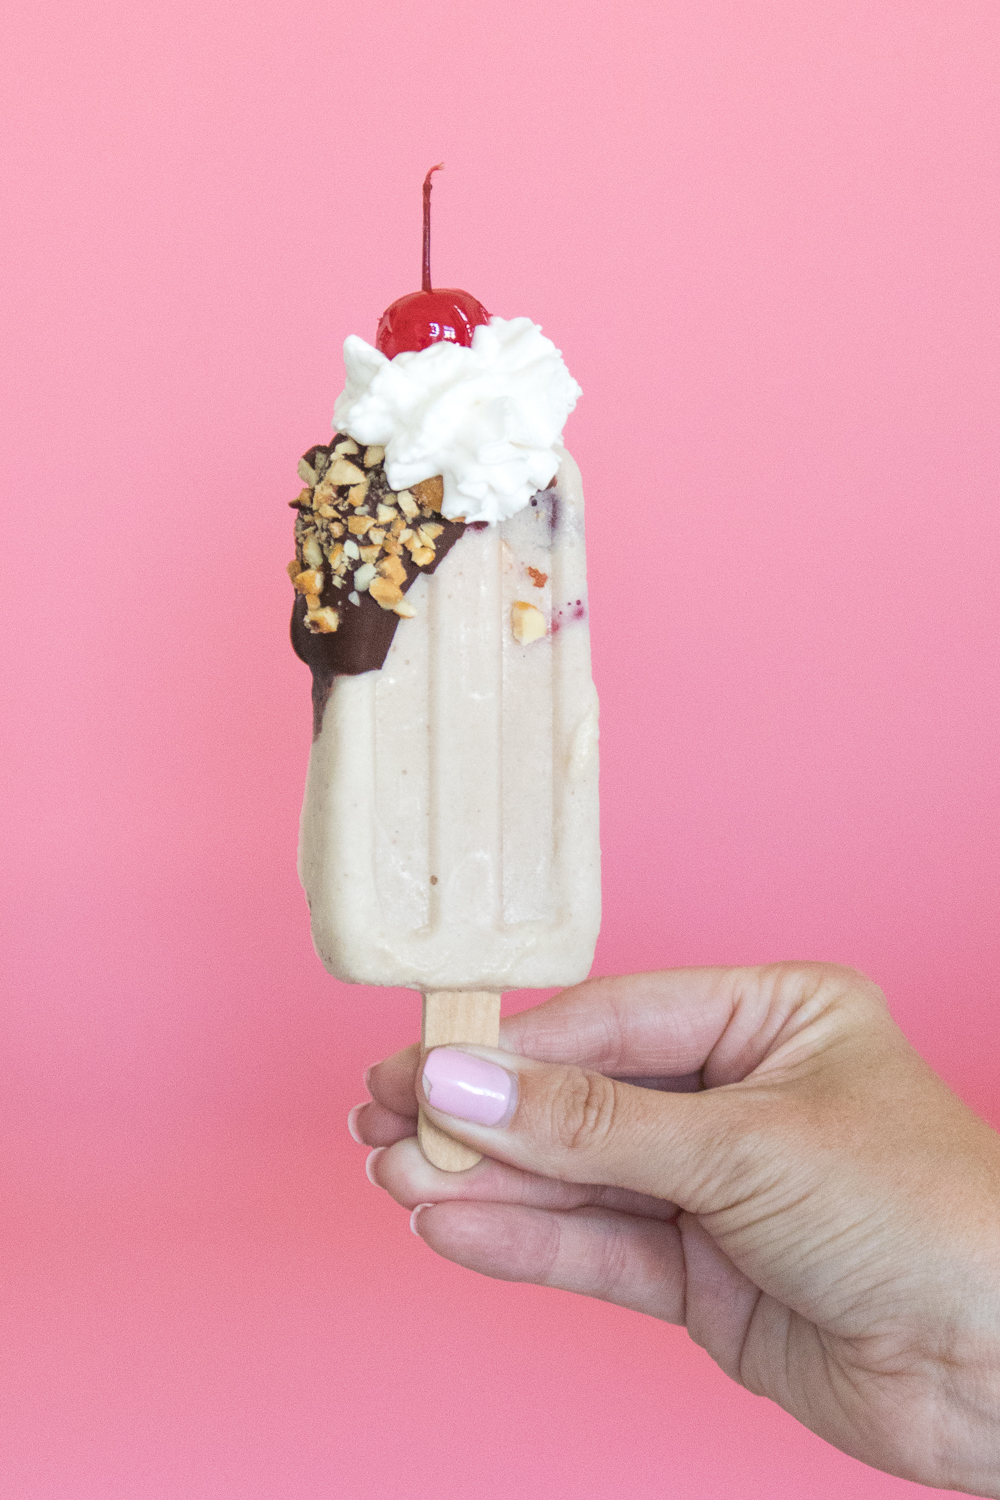 Banana Split Popsicles | Club Crafted